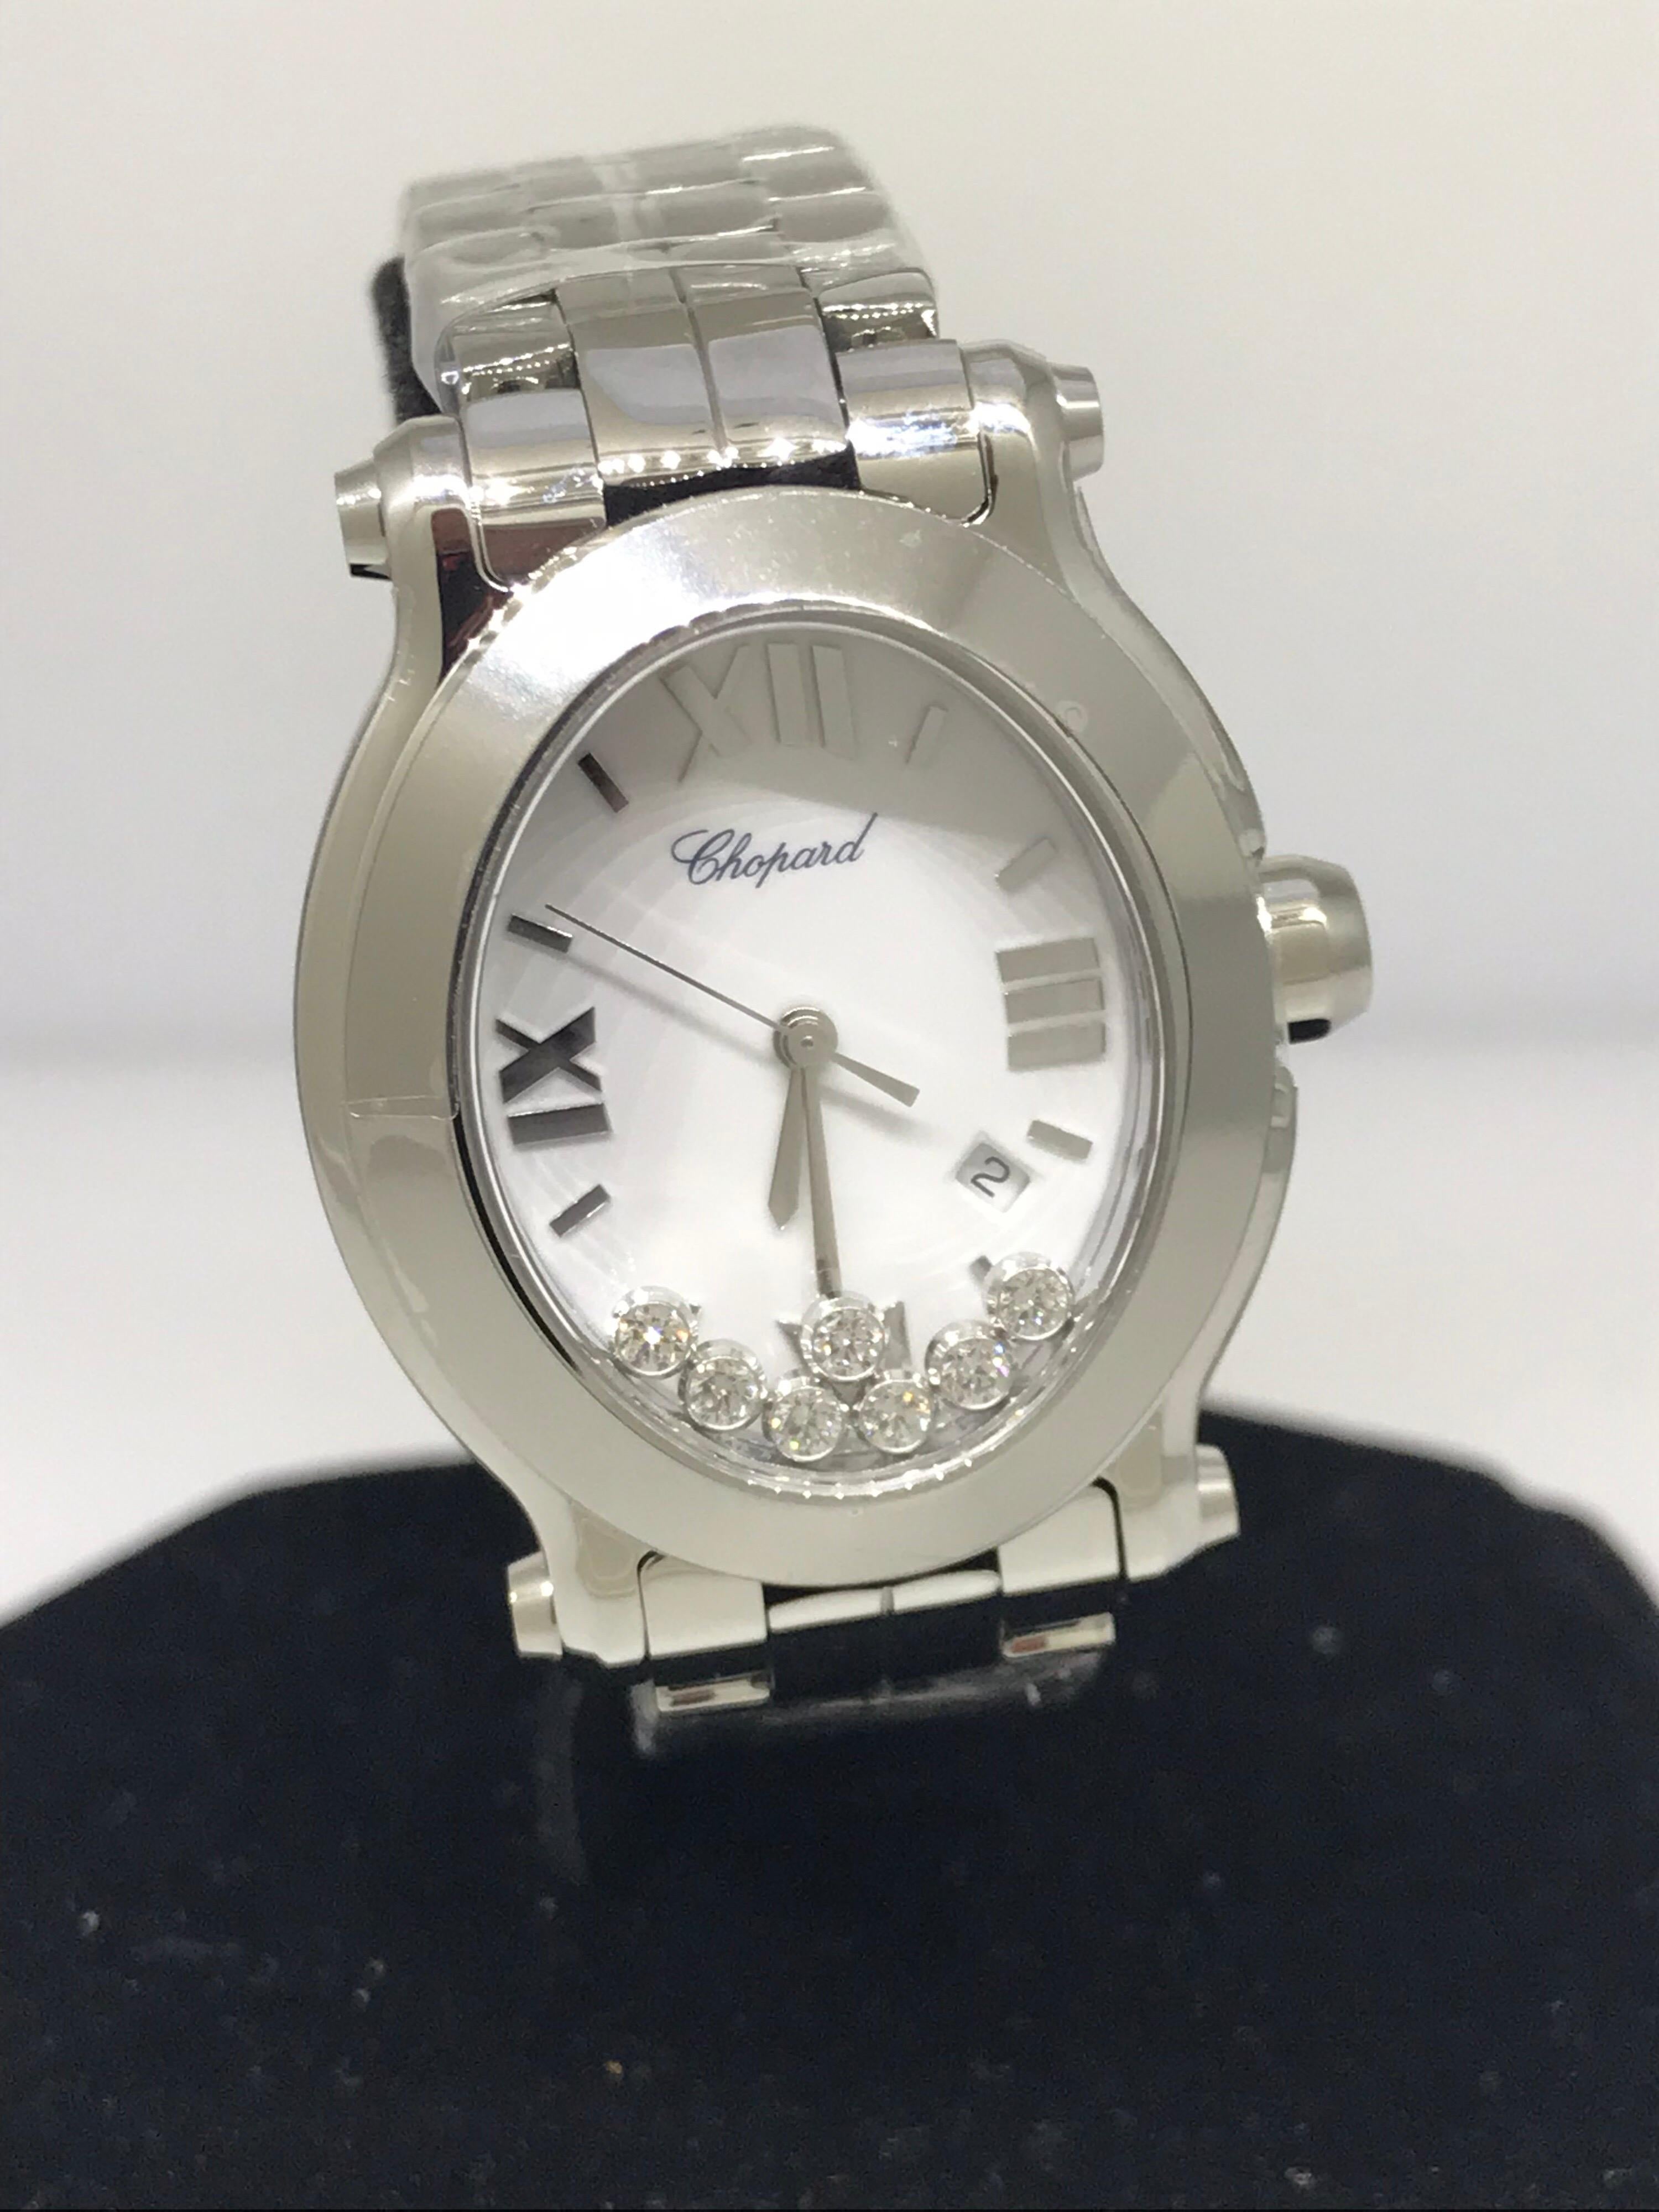 Chopard Happy Sport Ladies Watch

Model Number: 27/8546-3003

100% Authentic

Brand New

Comes with original Chopard Box, Certificate of Authenticity and Warranty, and Jewels Manual

Stainless Steel Case & Bracelet

White Dial

7 Floating Diamonds